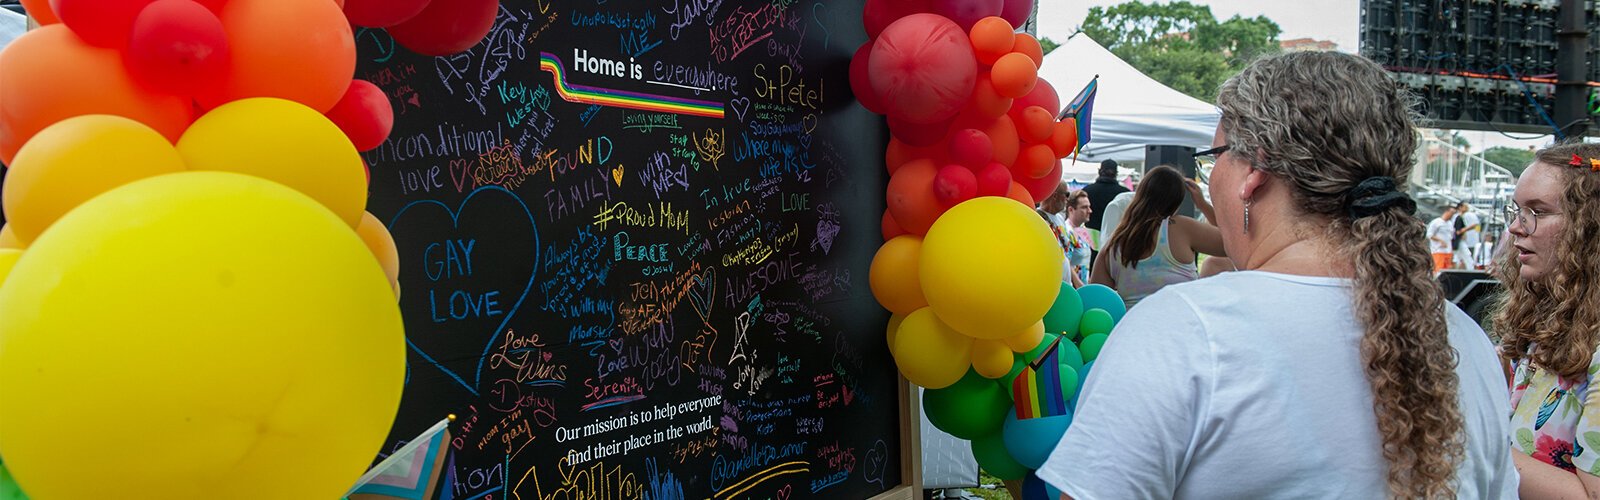 A large blackboard in the vendor area of the St. Pete Pride Parade is covered with messages of encouragement.